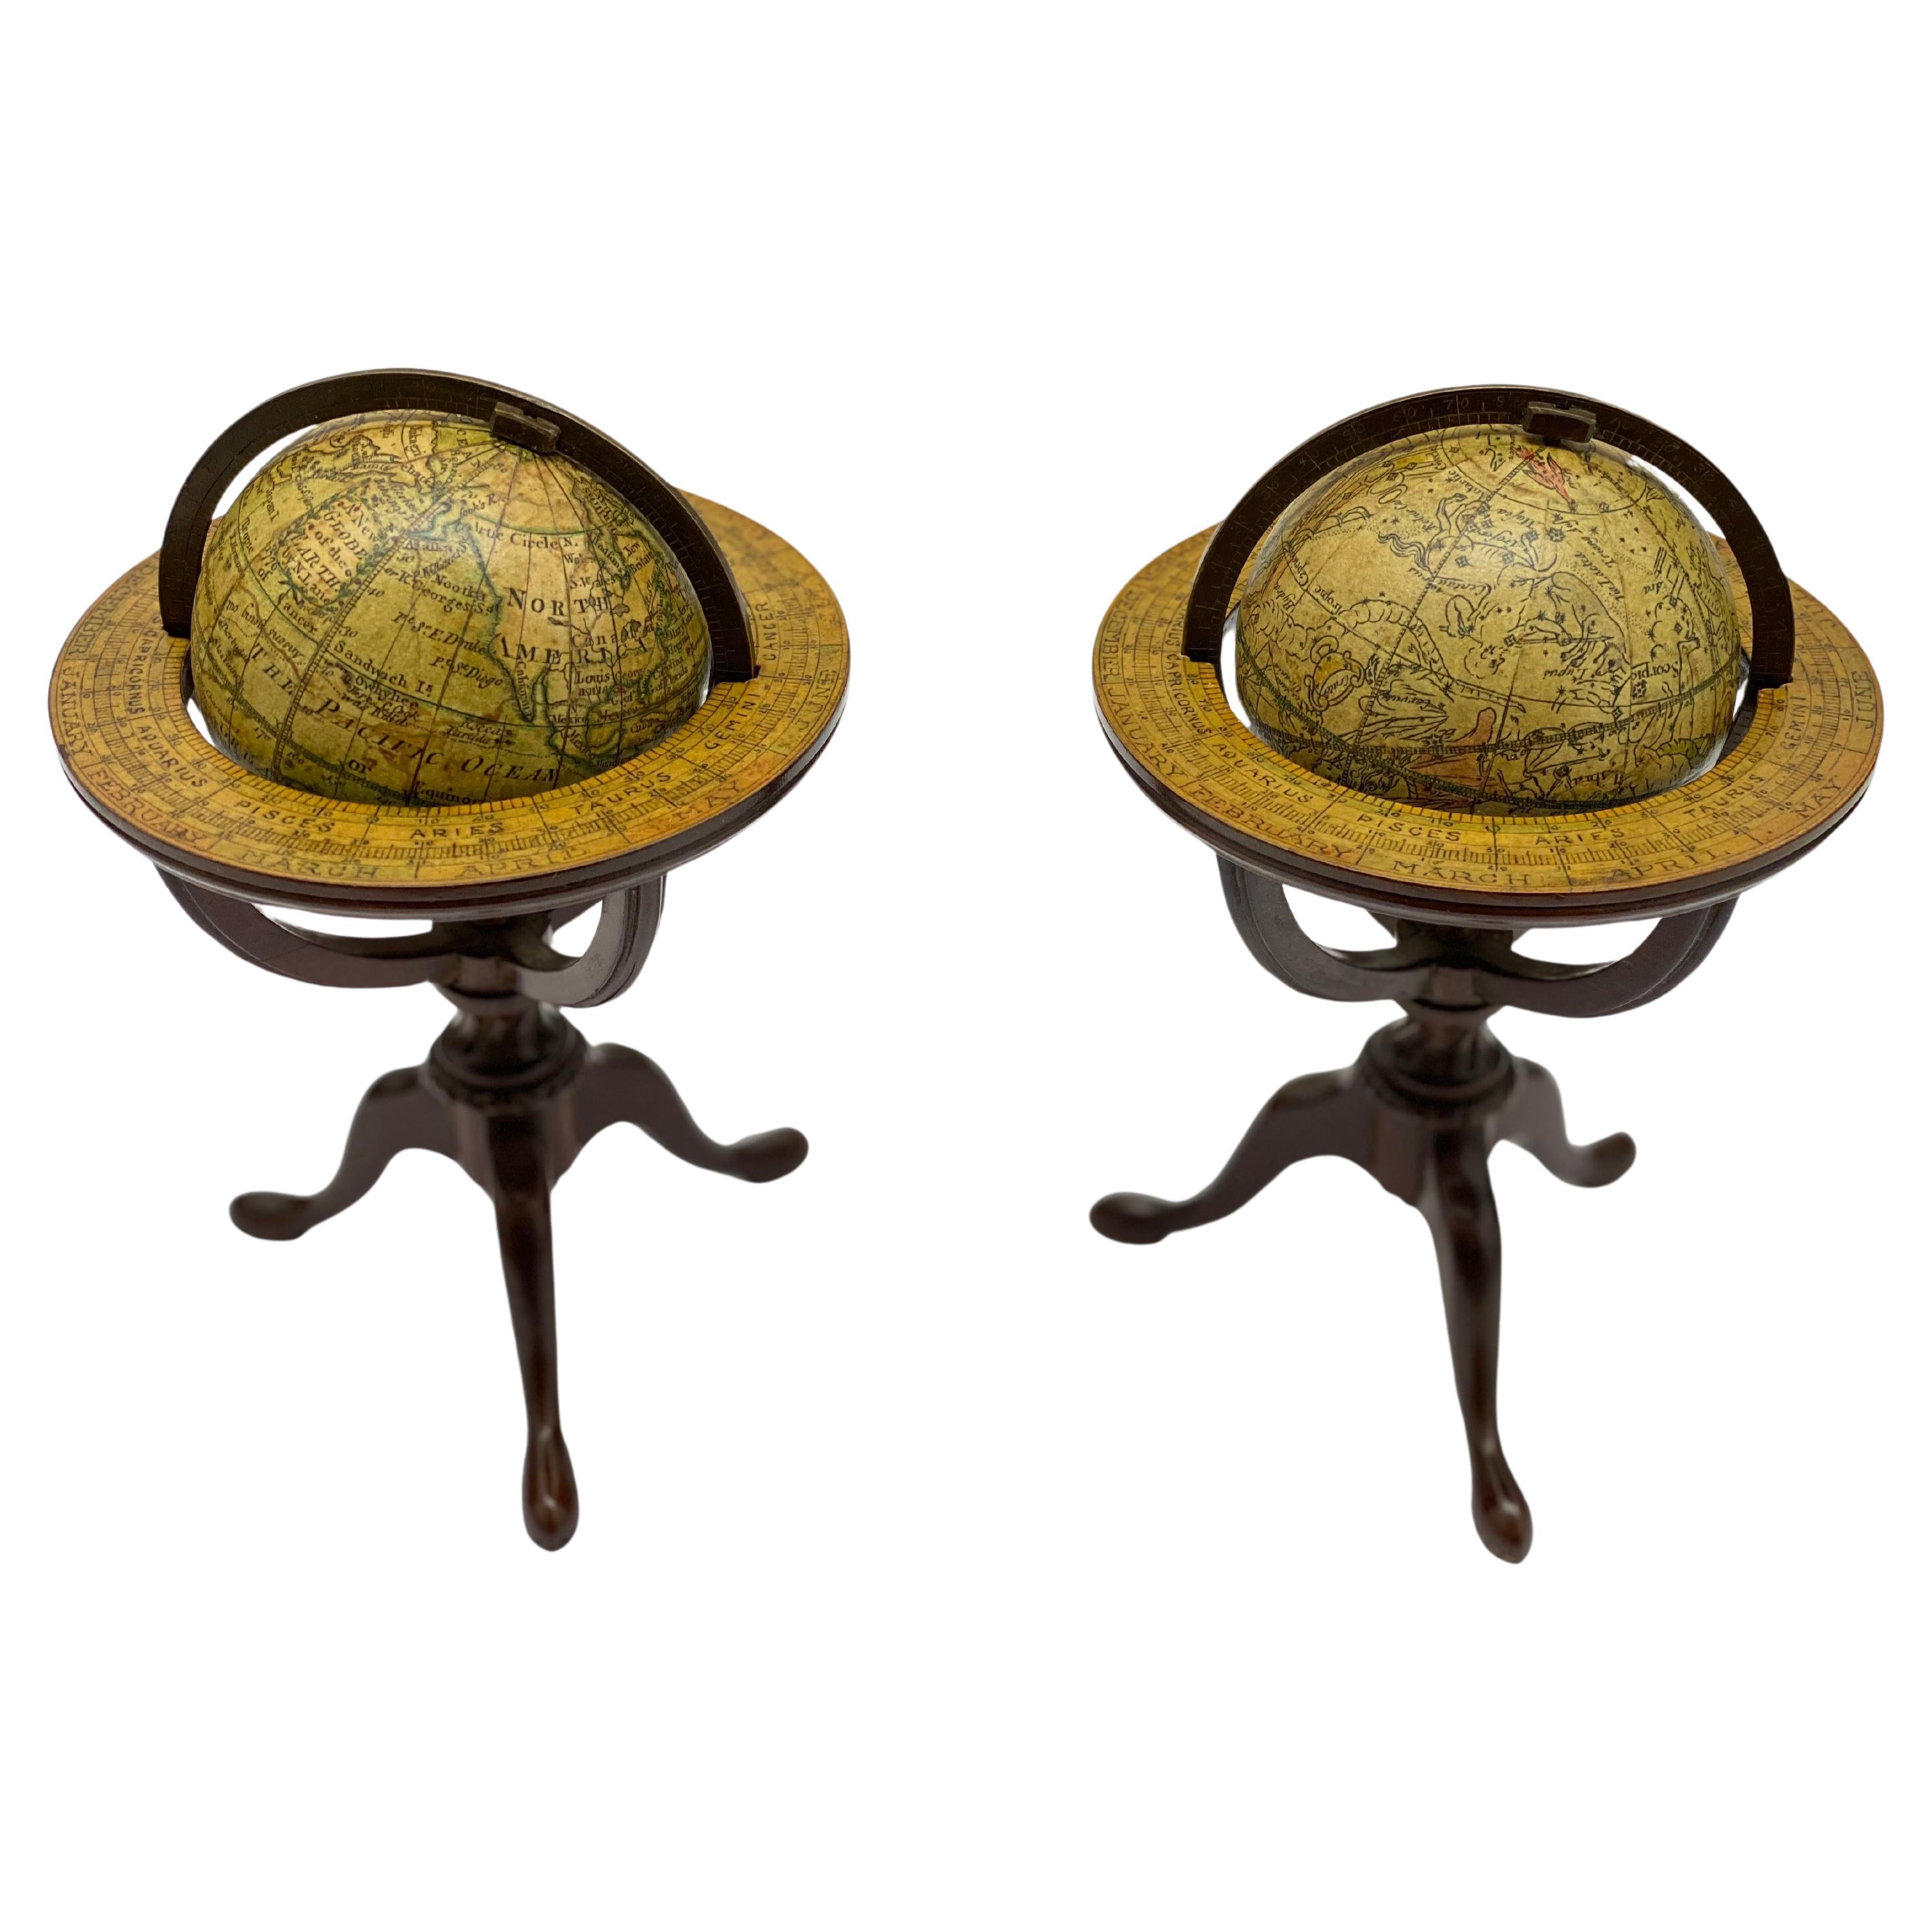  An attractive pair of late-eighteenth century English pocket globes 